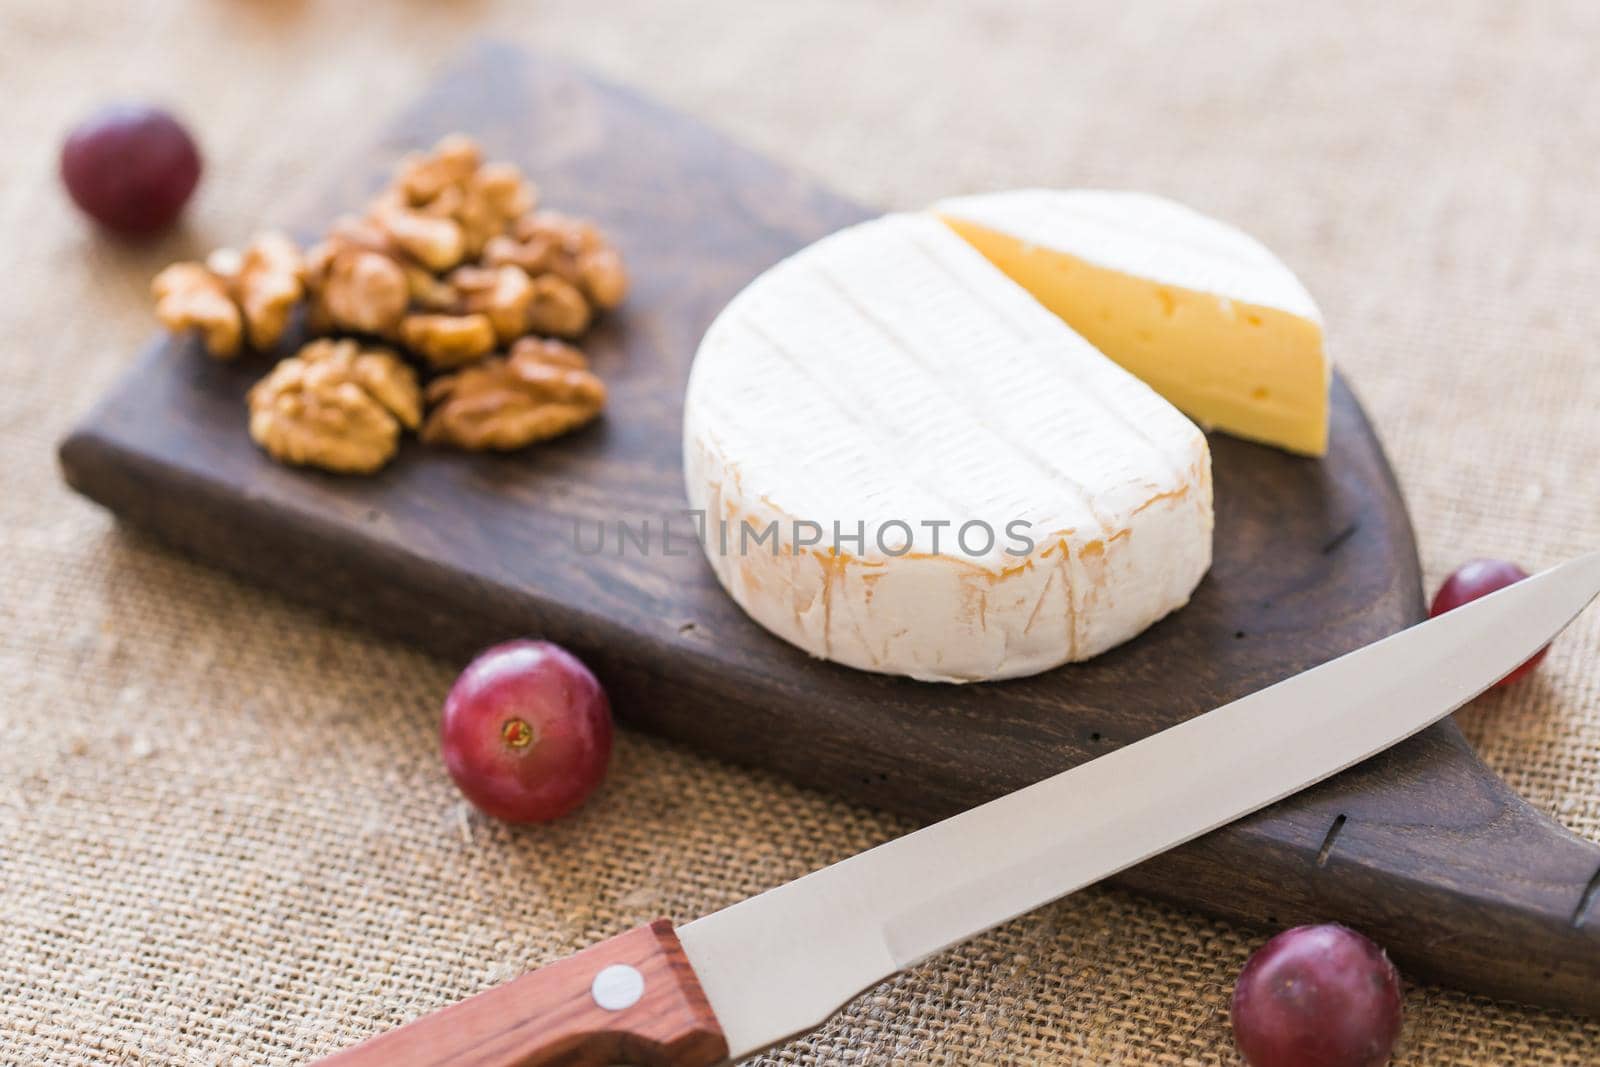 Brie type of cheese. Camembert cheese. Fresh Brie cheese on a wooden board with nuts and grapes. Italian, French cheese. by Satura86